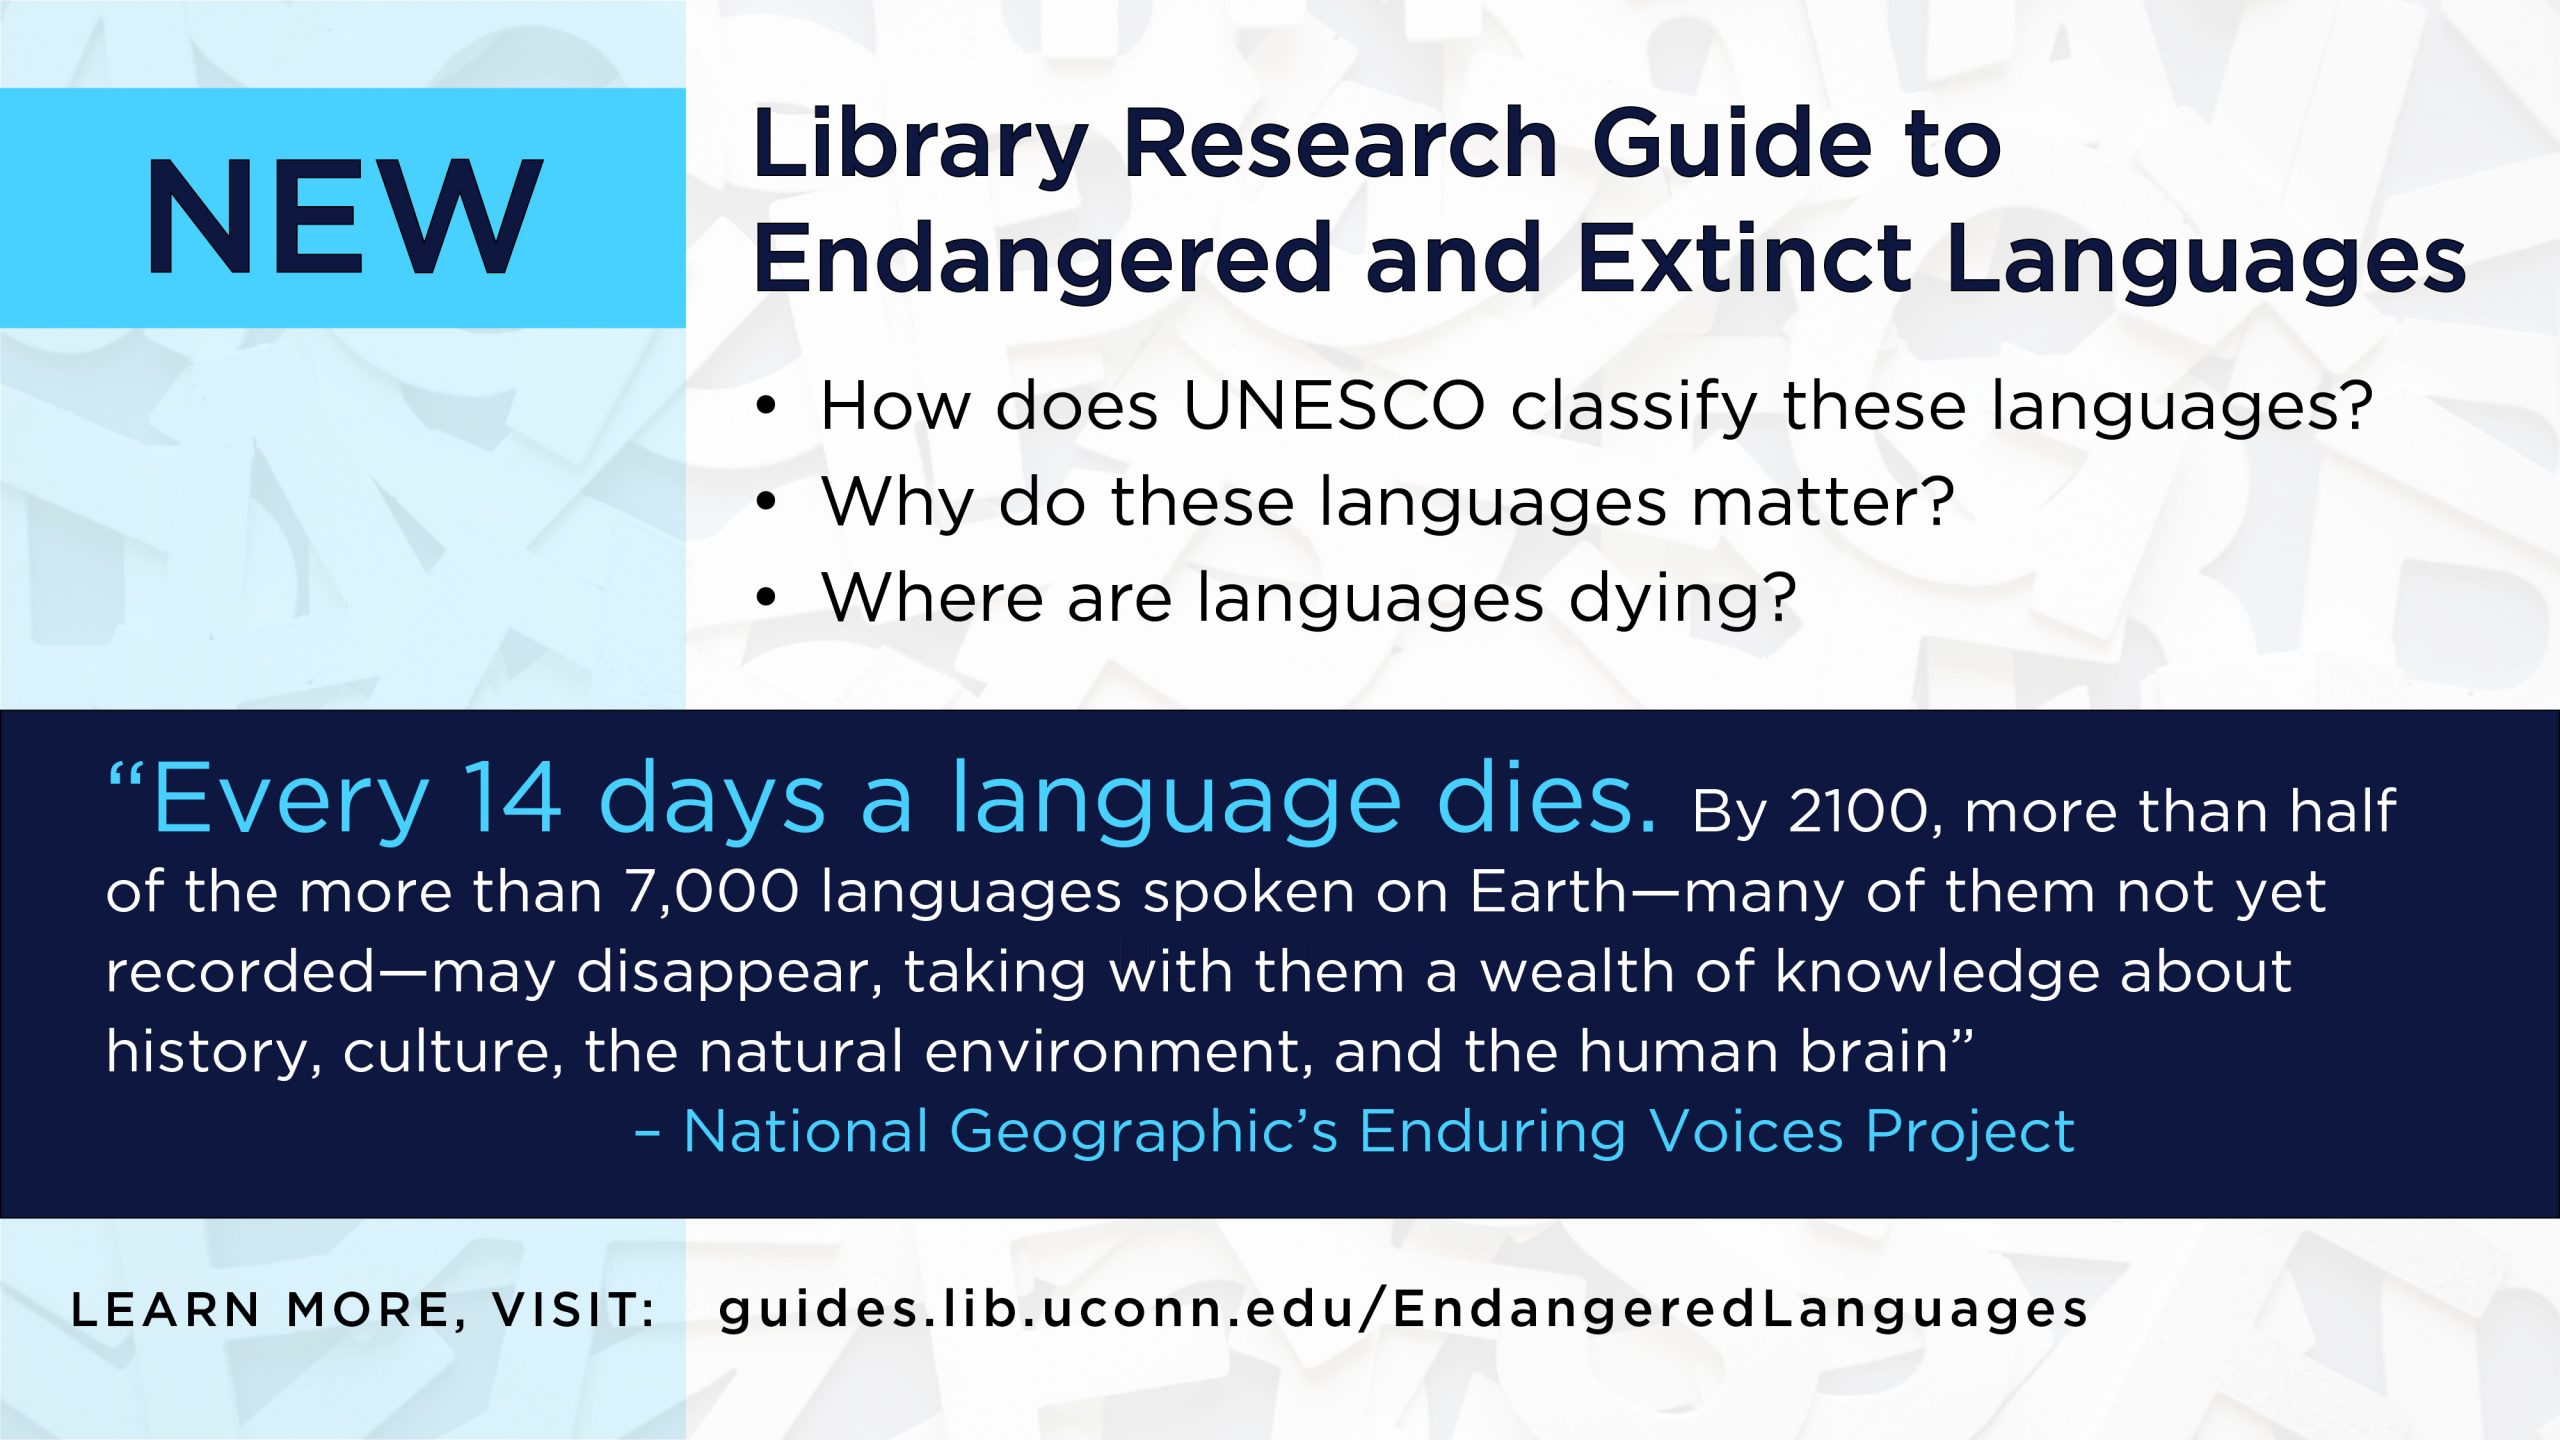 New. Library Research Guide to Endangered and Extinct Languages. “Every 14 days a language dies. By 2100, more than half of the more than 7,000 languages spoken on Earth—many of them not yet recorded—may disappear, taking with them a wealth of knowledge about history, culture, the natural environment, and the human brain” – National Geographic’s Enduring Voices Project. LEARN MORE, VISIT: guides.lib.uconn.edu/EndangeredLanguages